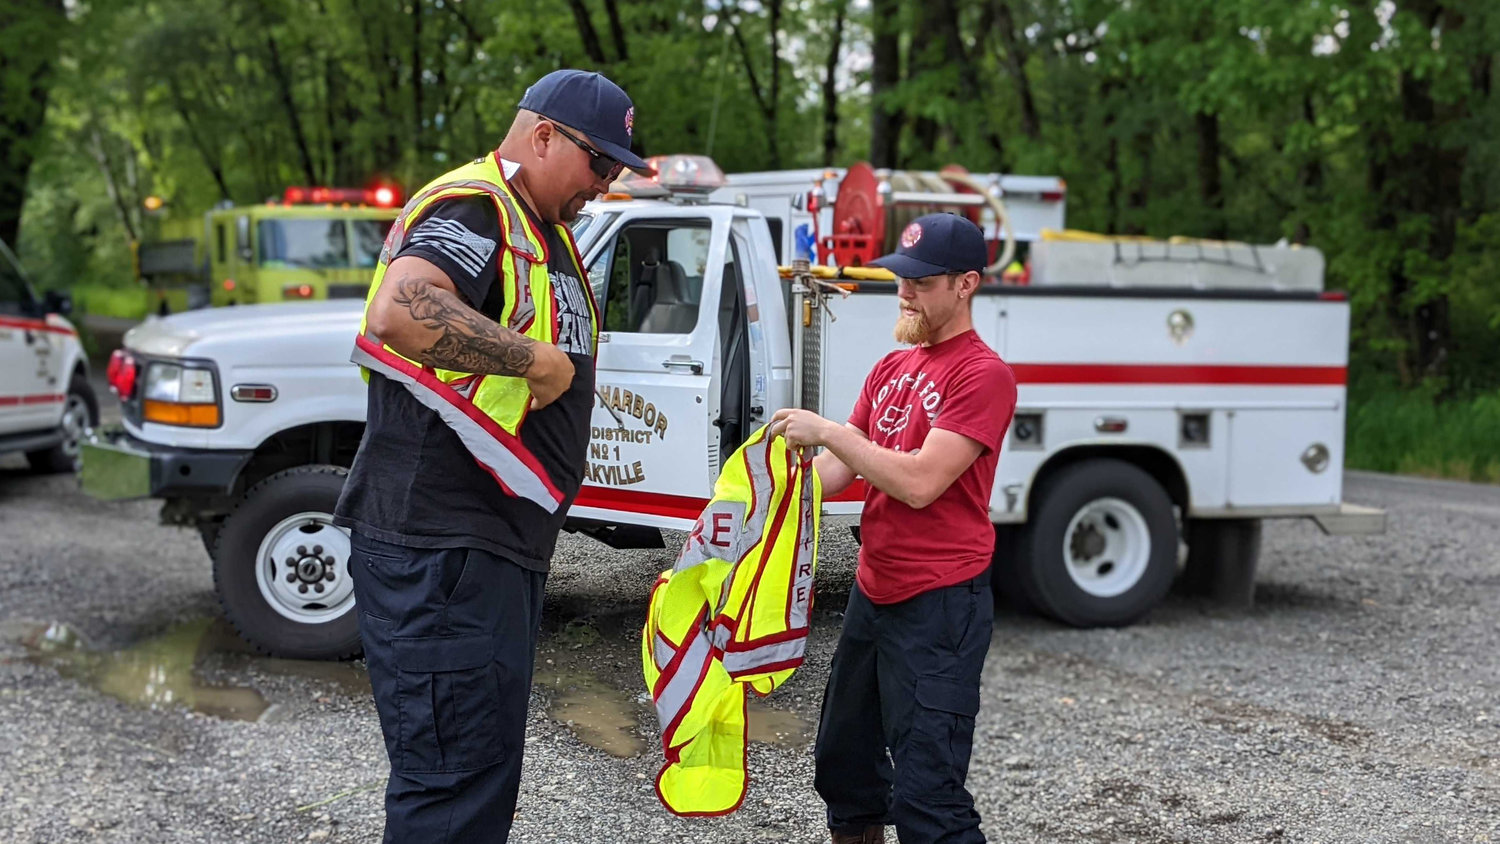 Jeremy Anderson and Cory Antony from Grays Harbor Fire District 1 don their vests after being on the team that saved a man from the Chehalis River when his canoe tipped on Saturday.